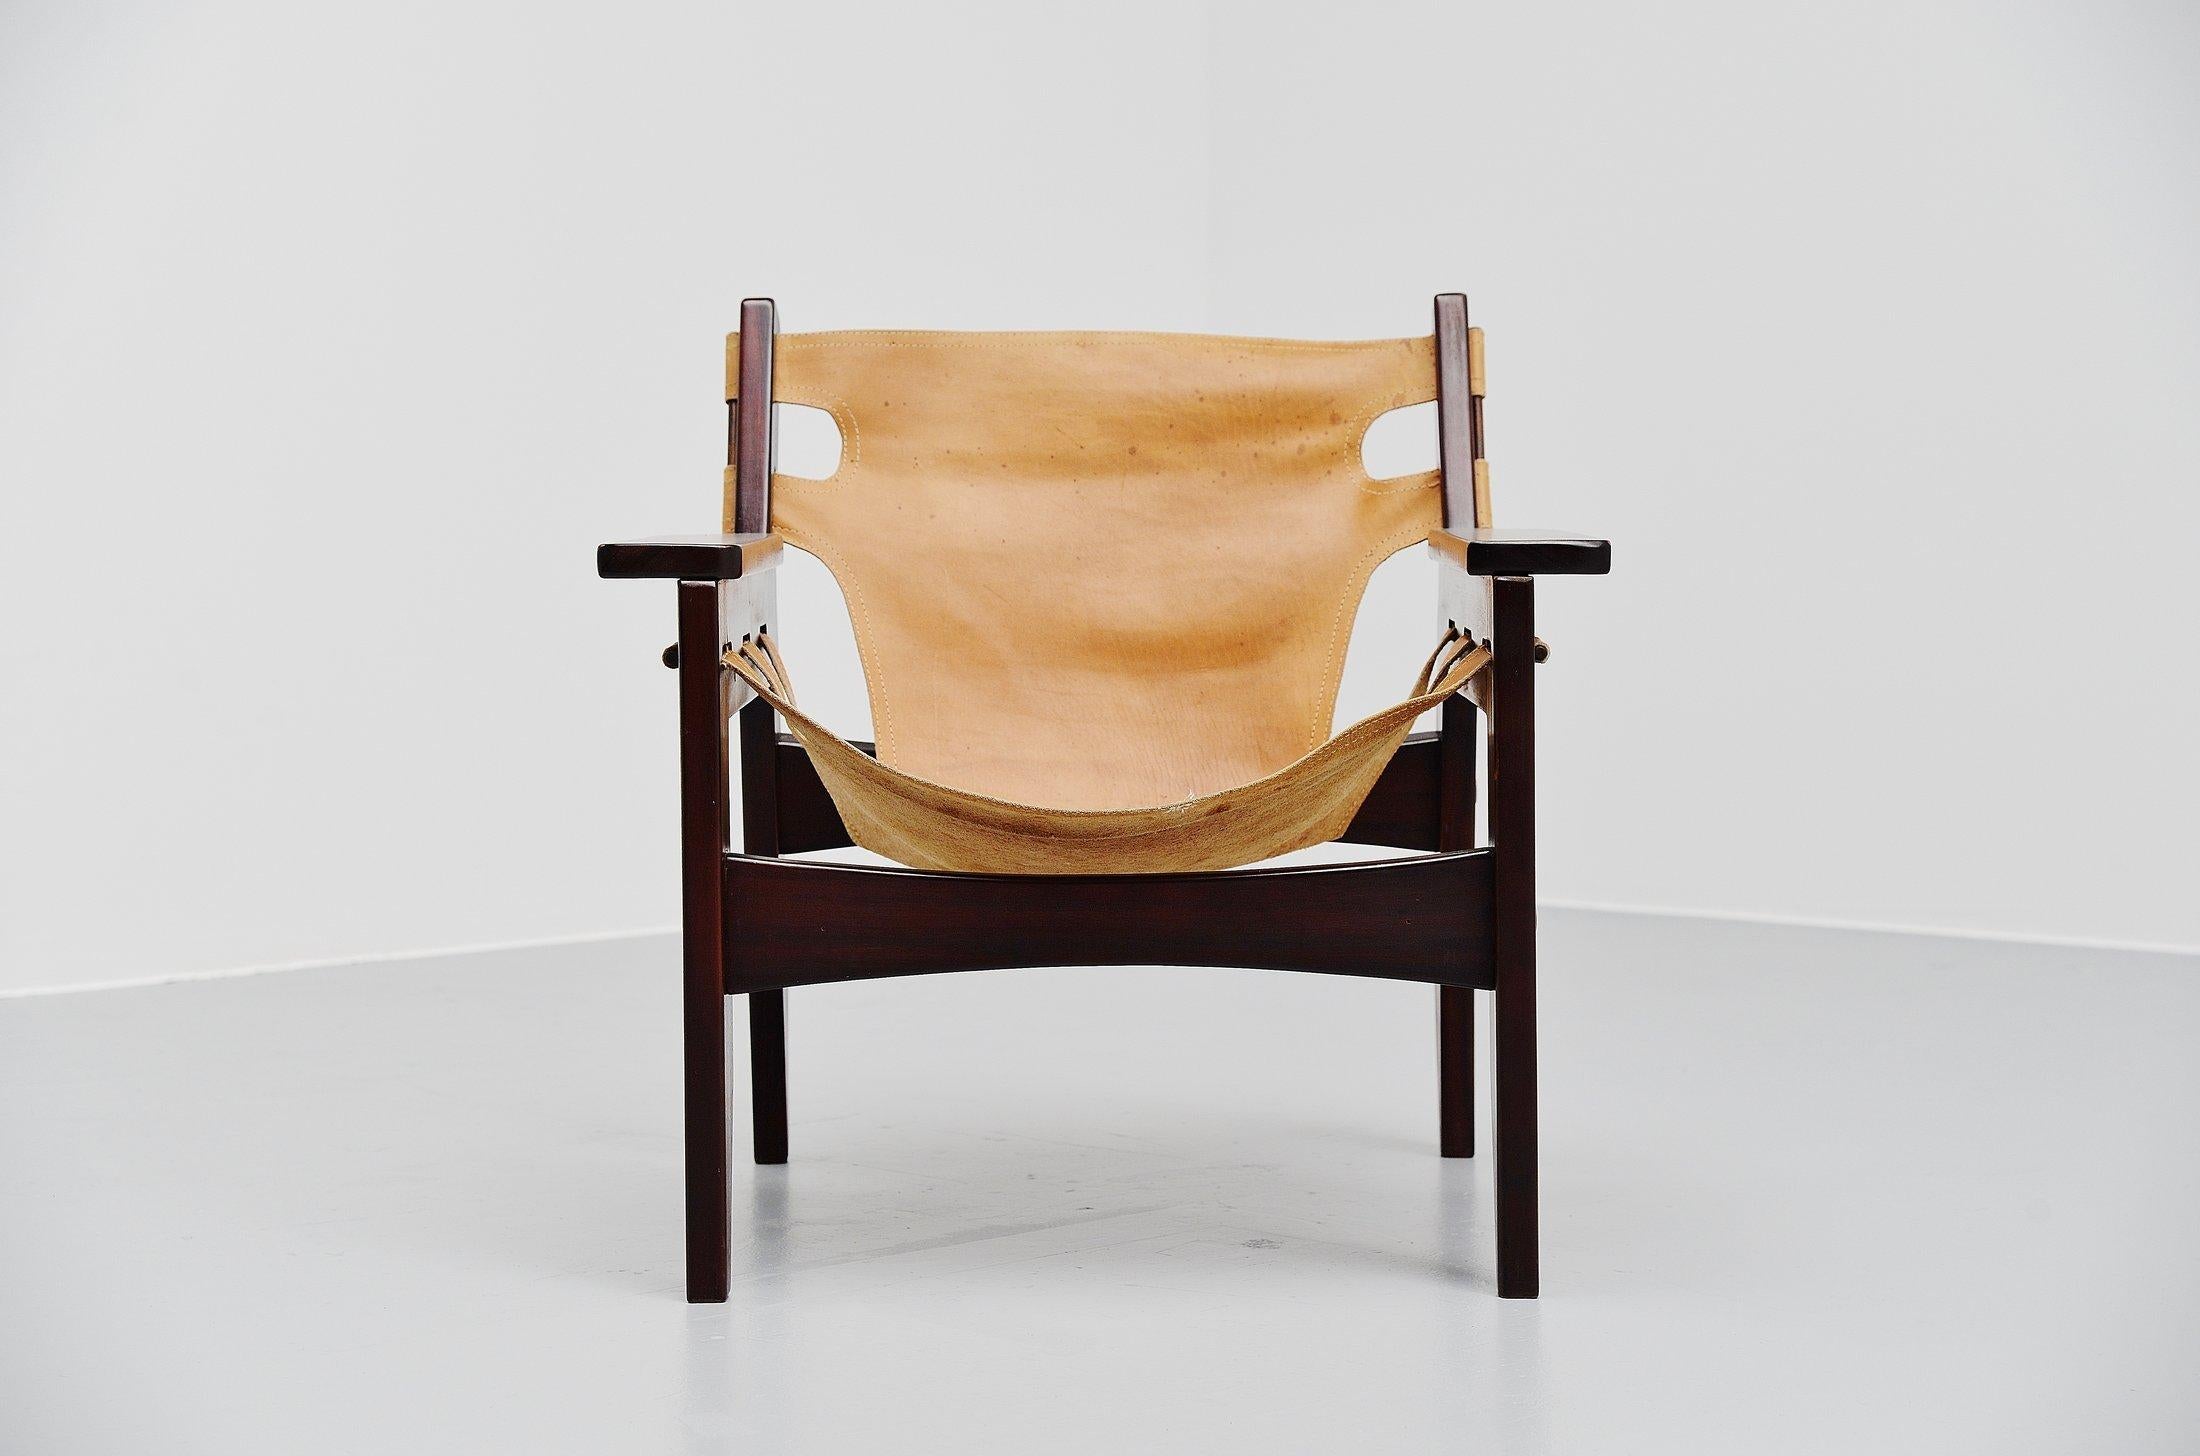 Very nice mahogany ‘Kilin’ easy chair designed by Sergio Rodrigues for OCA, Brazil, 1973. This is the European version of the Kilin easy chair in very nice deep grained mahogany with natural leather seat. This is a fantastic shaped chair, one of my